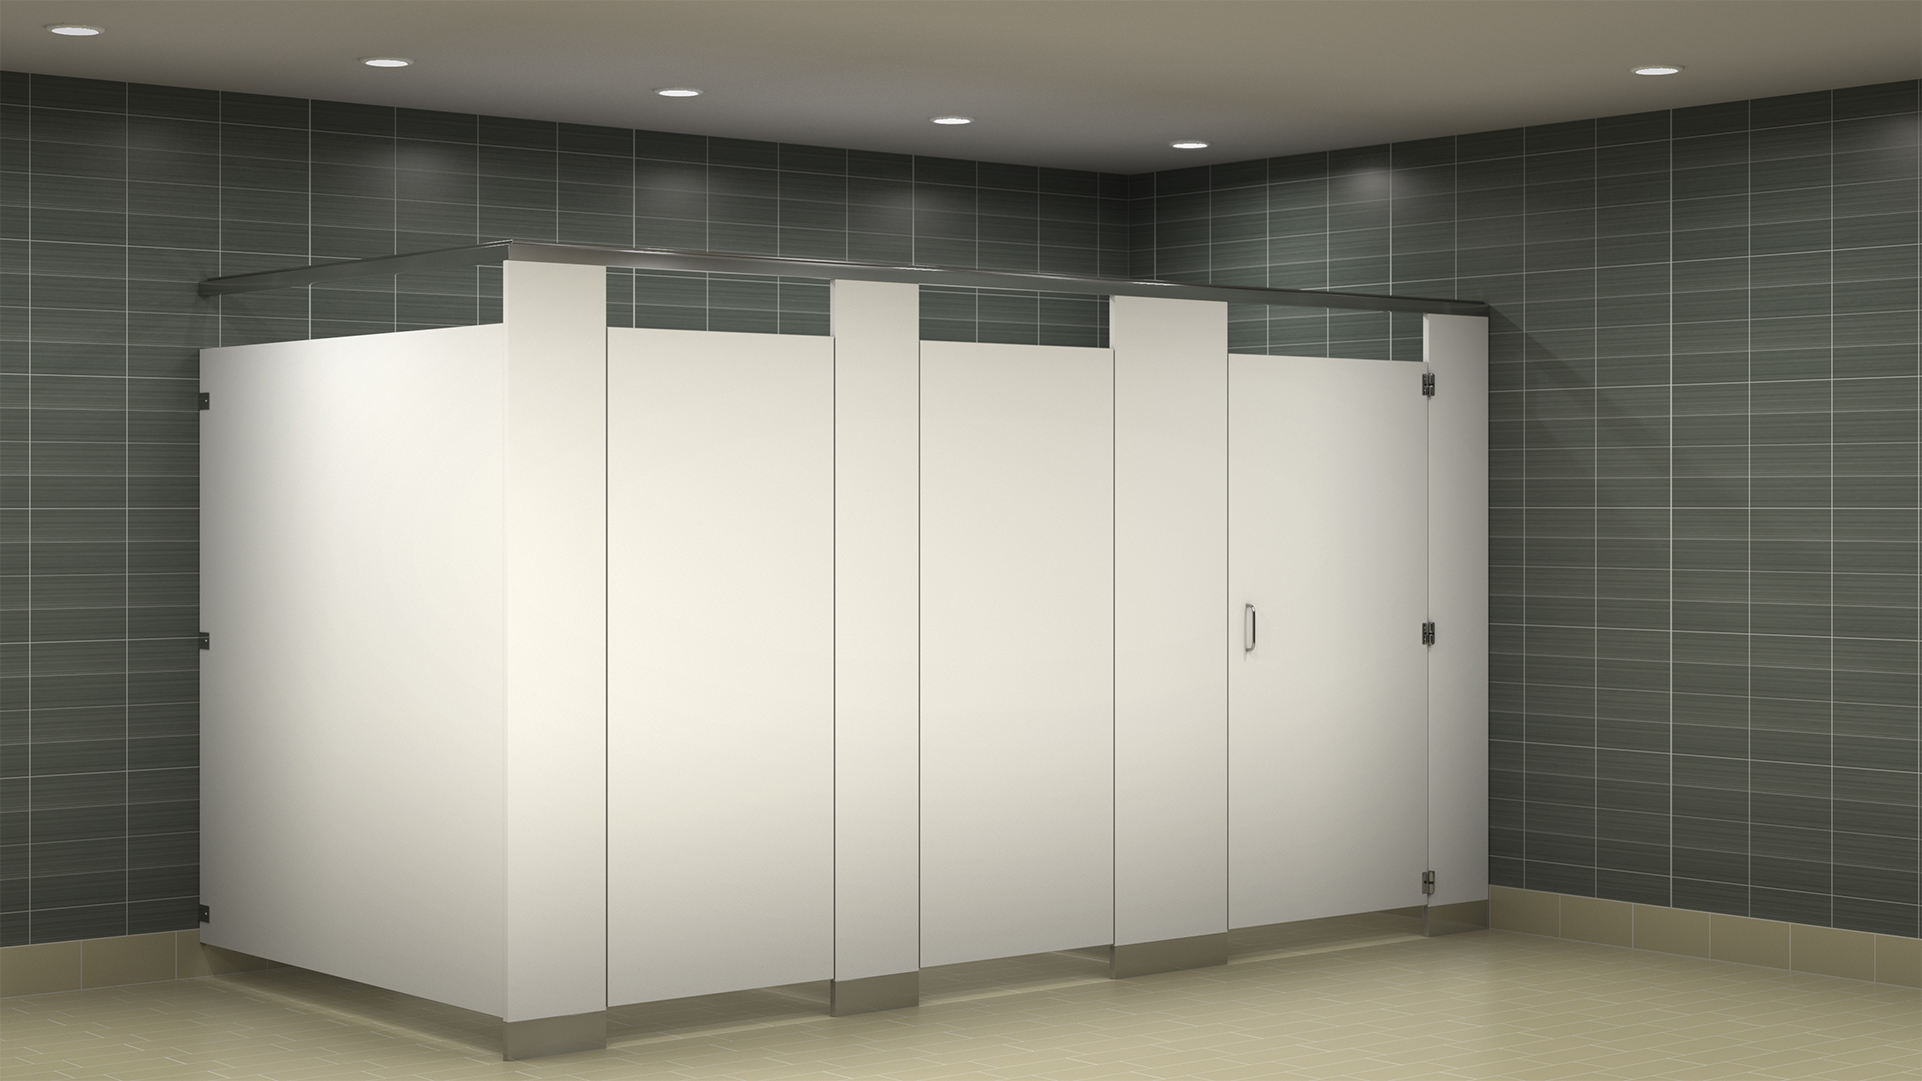 Bobrick SierraSeries Overhead Braced Toilet Partitions sold by J. Laurenzo Specialties